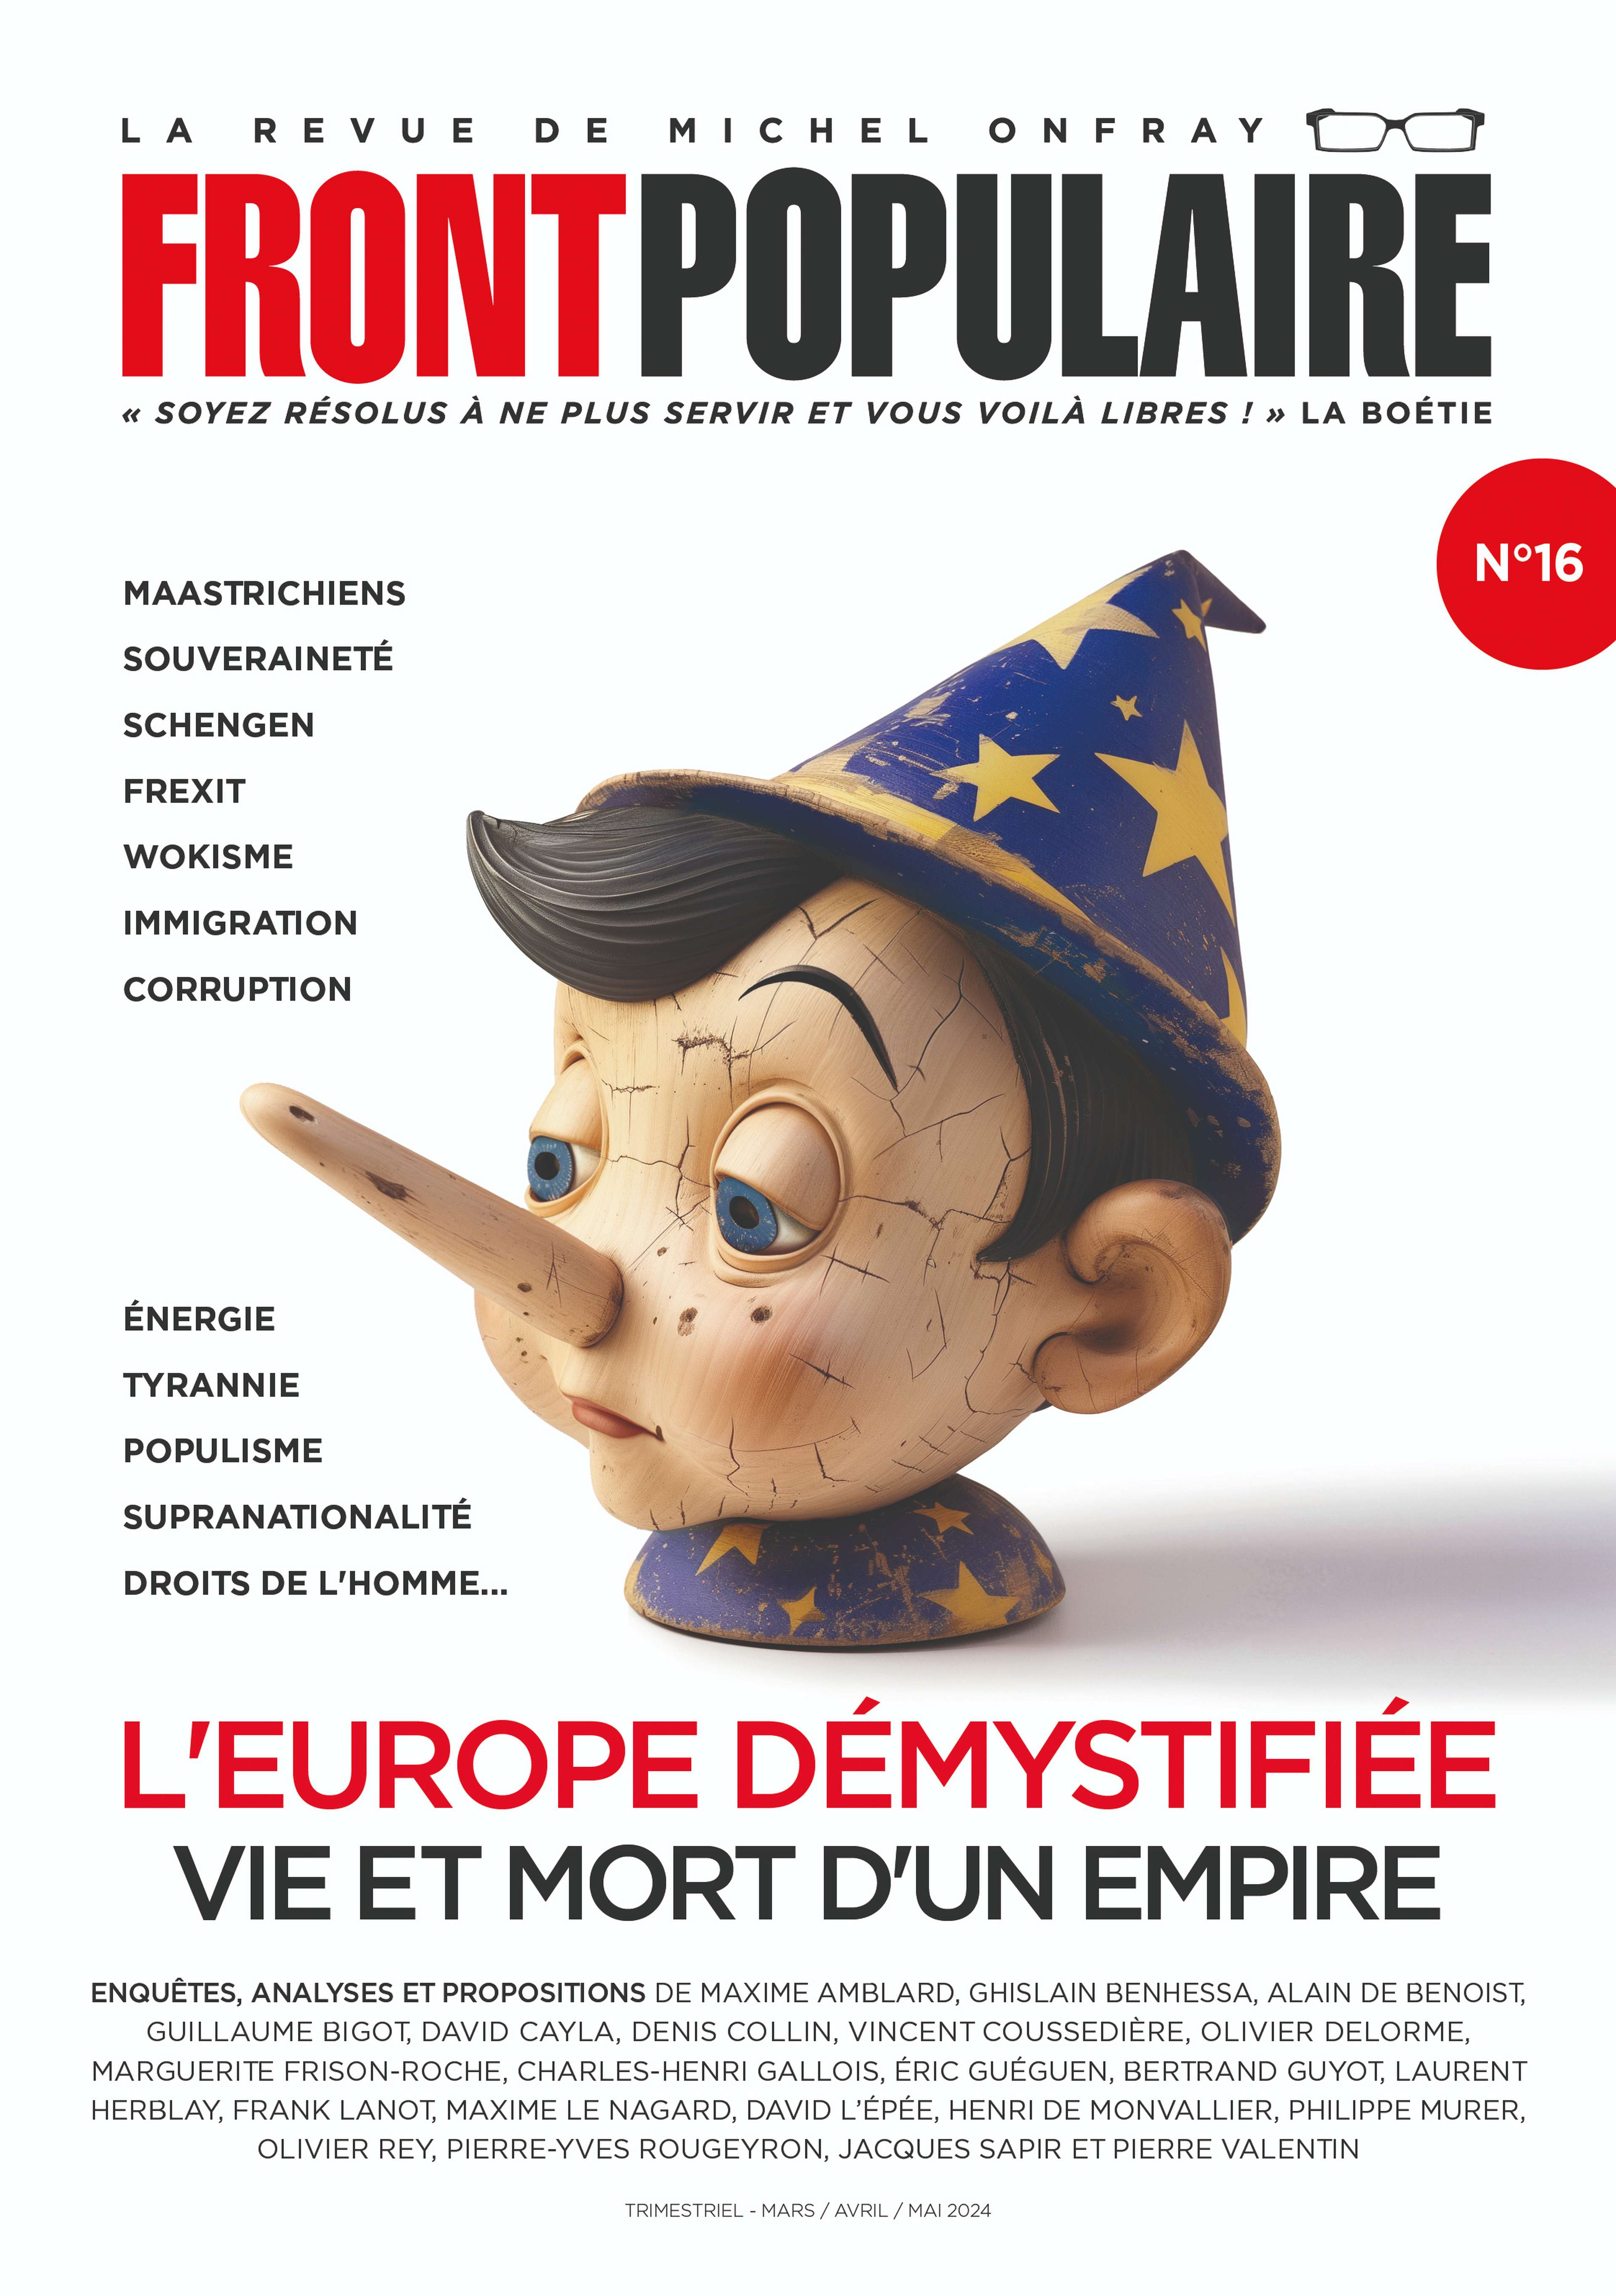 front-populaire-16-europe